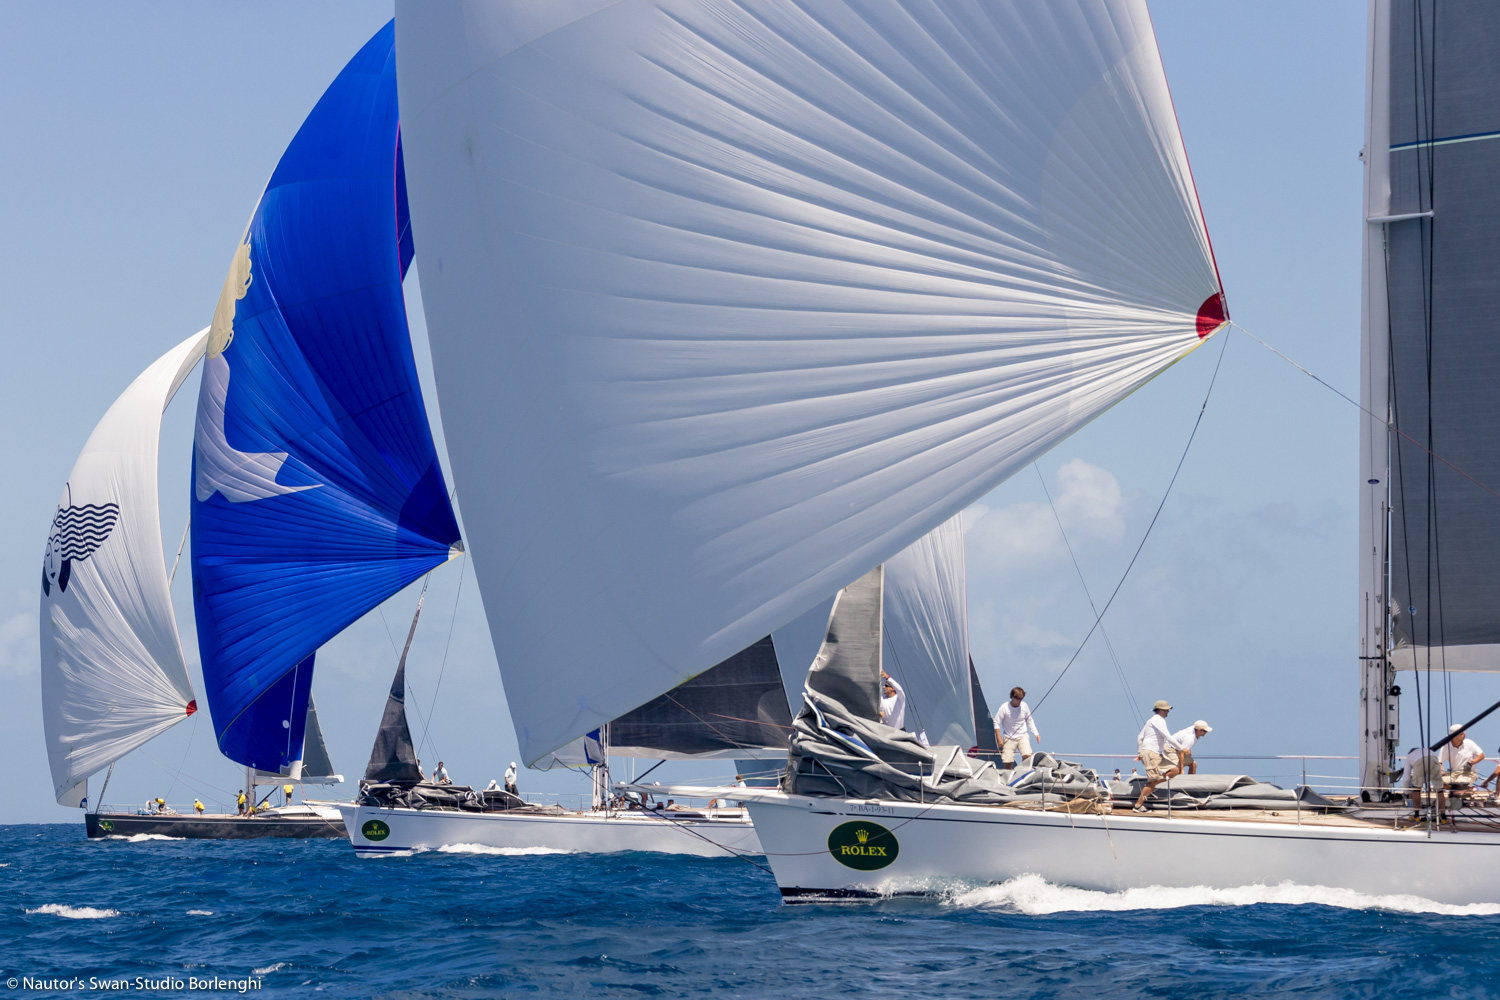 Leaders hold firm heading into final race day  - NEWS - Yacht Club Costa Smeralda